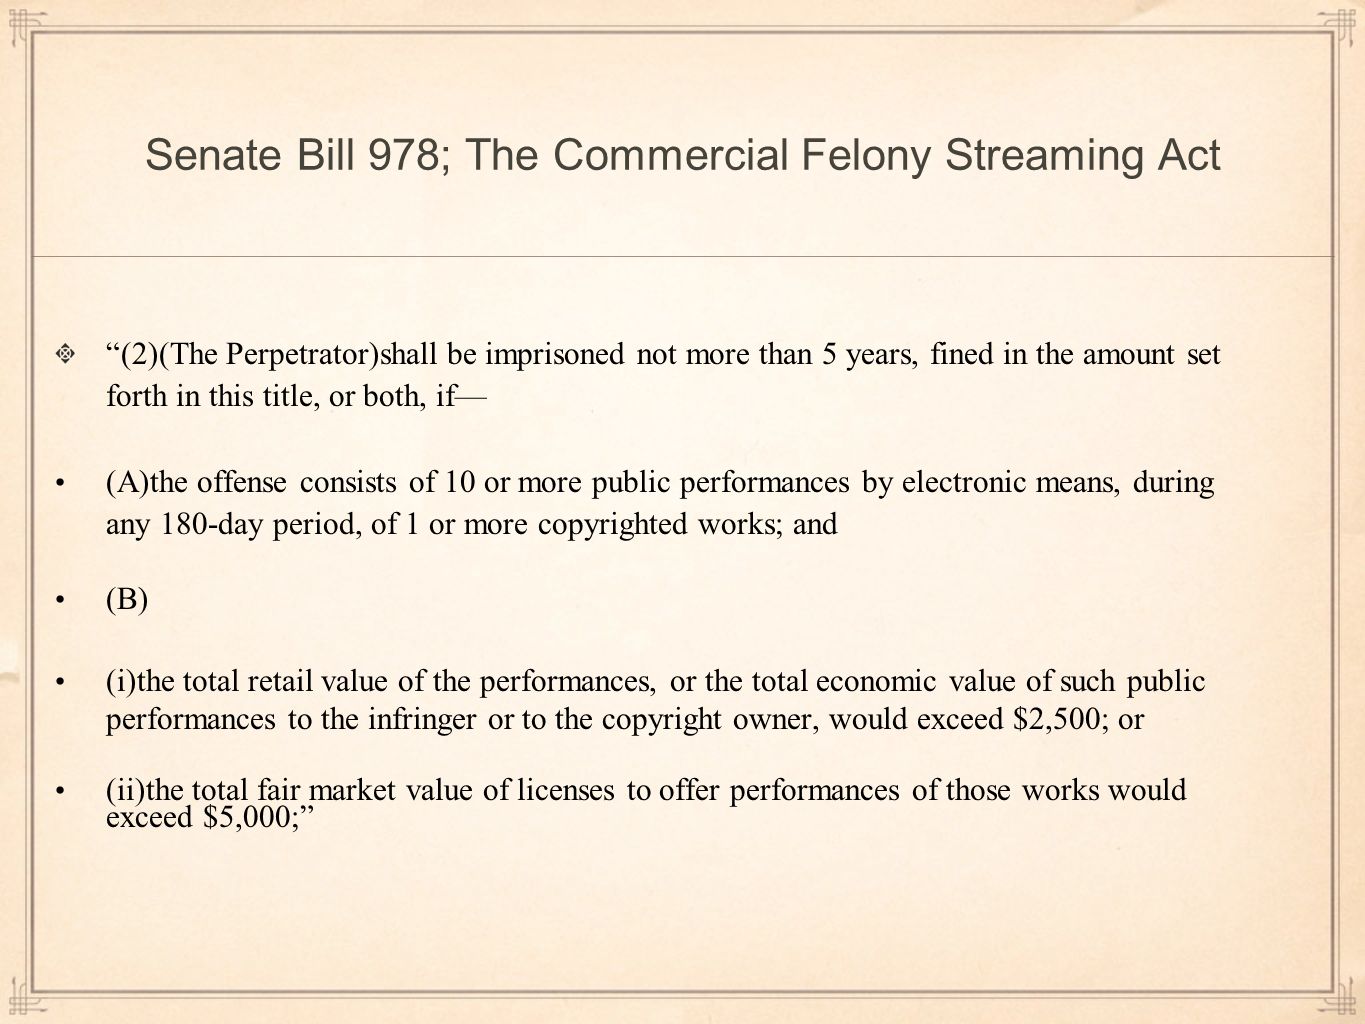 Senate Bill 978; The Commercial Felony Streaming Act (2)(The Perpetrator)shall be imprisoned not more than 5 years, fined in the amount set forth in this title, or both, if— (A)the offense consists of 10 or more public performances by electronic means, during any 180-day period, of 1 or more copyrighted works; and (B) (i)the total retail value of the performances, or the total economic value of such public performances to the infringer or to the copyright owner, would exceed $2,500; or (ii)the total fair market value of licenses to offer performances of those works would exceed $5,000;